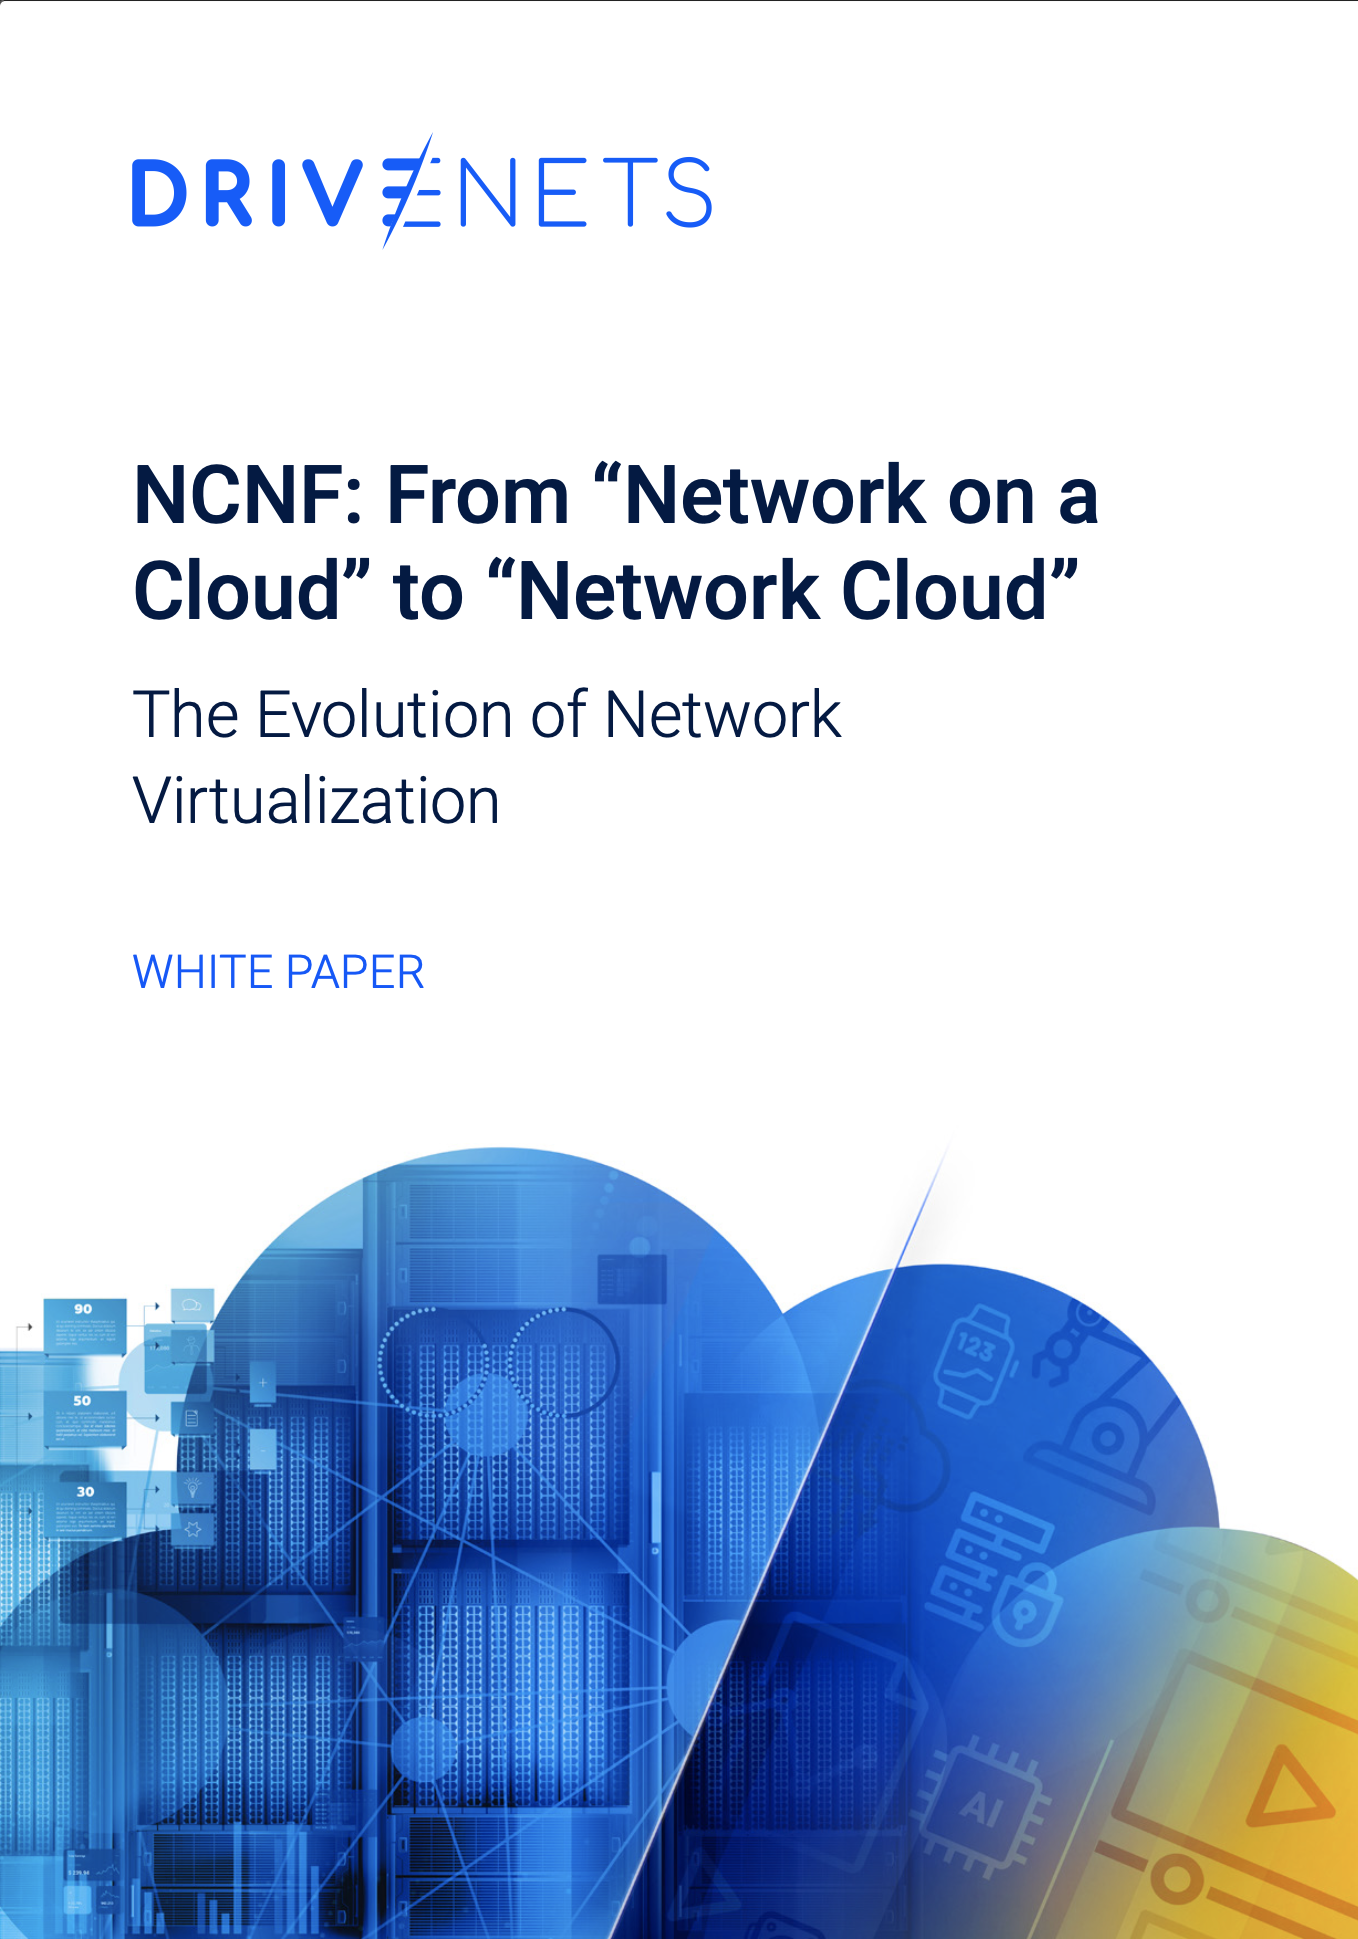 NCNF: From “Network on a Cloud” to “Network Cloud”